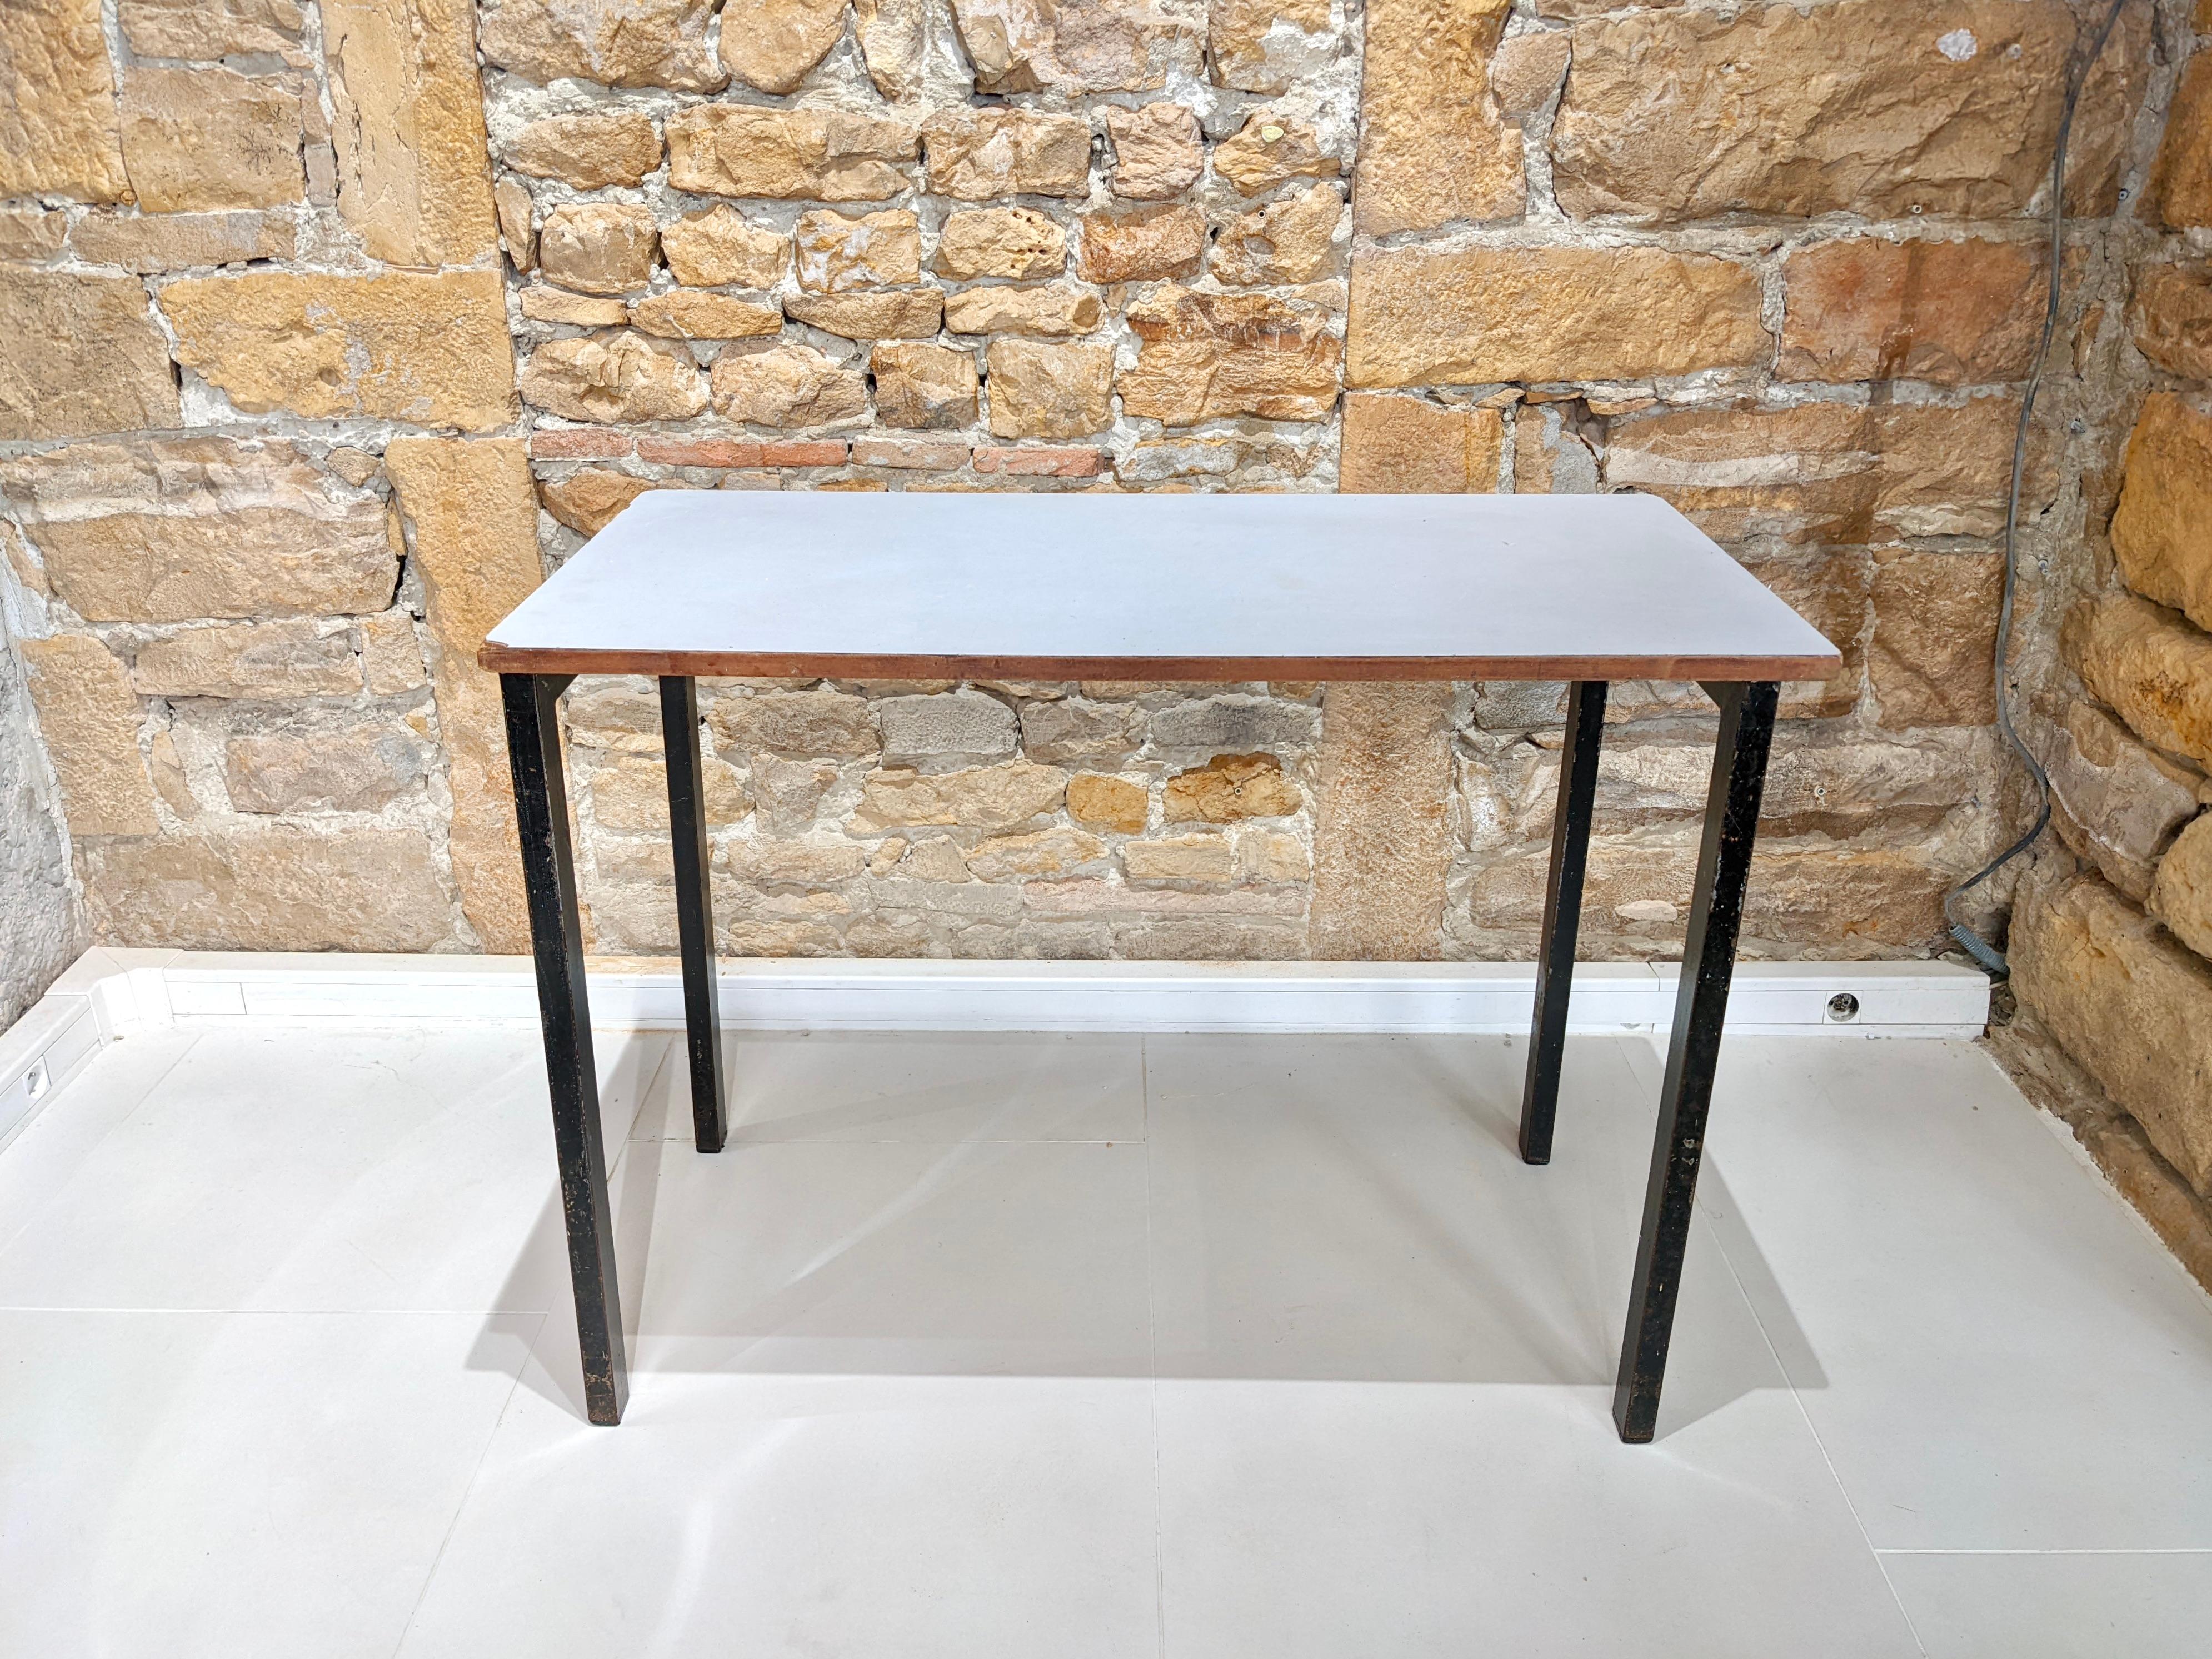 Cansado table by Charlotte Perriand. 
Circa 1950. It consists of a white formica top and a metal base. 
Presence of wear due to age and use (see pictures). 
Provenance : Cansado, Mauritania 

Dimensions : D 50 cm x H 75 x W 100.